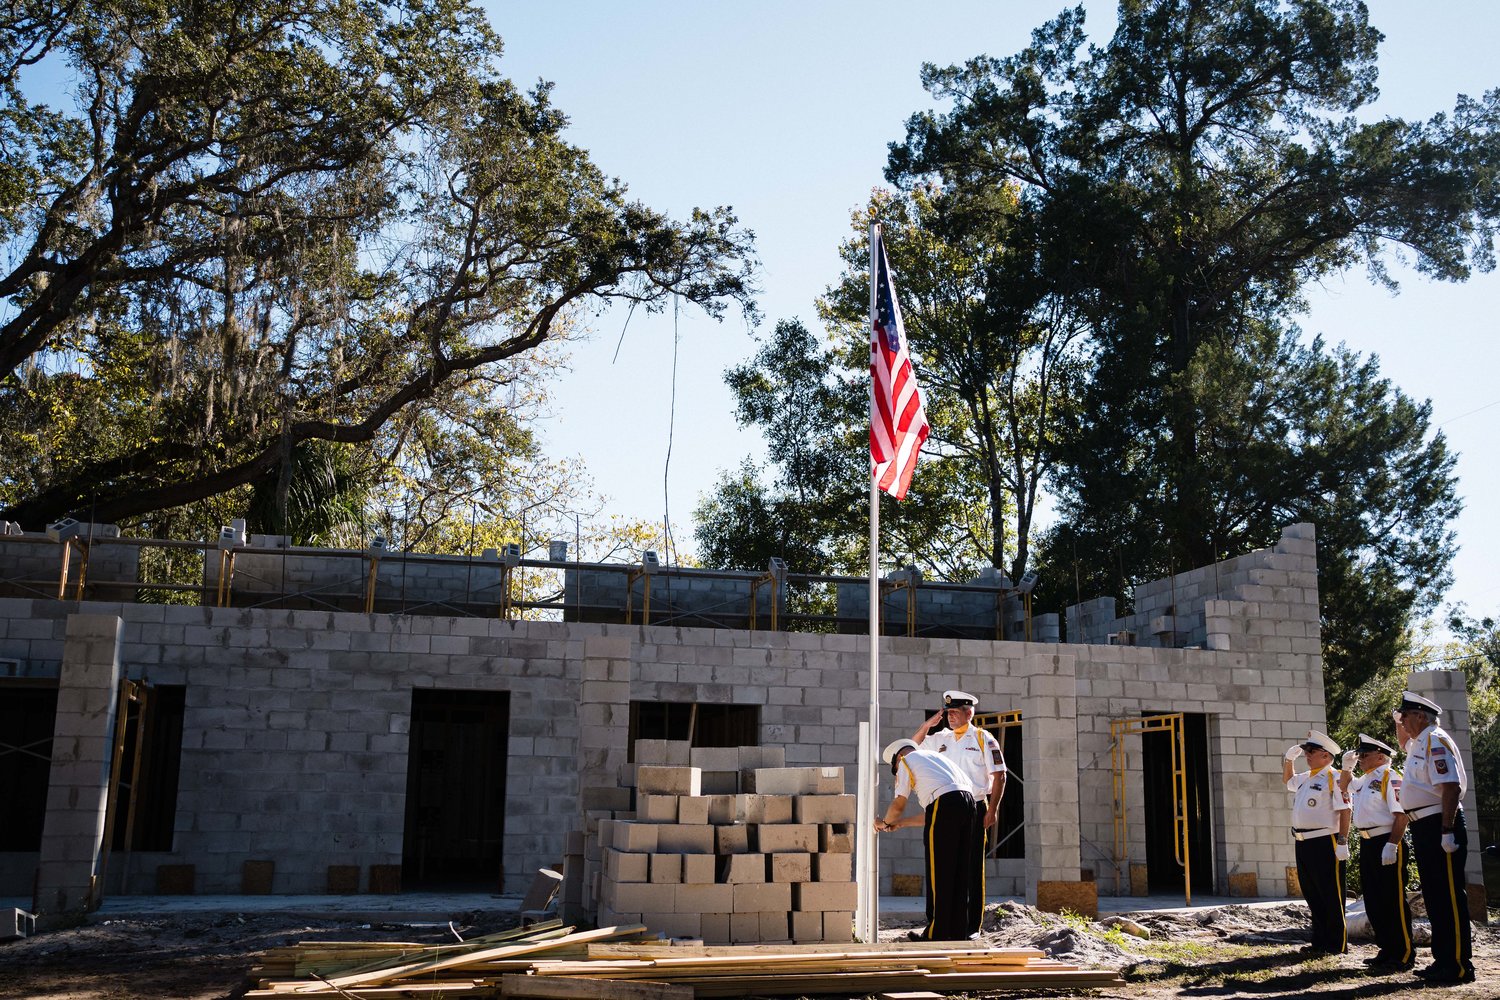 The St. Augustine Honor Guard raises the flag on the site where Patriot Place is being constructed.